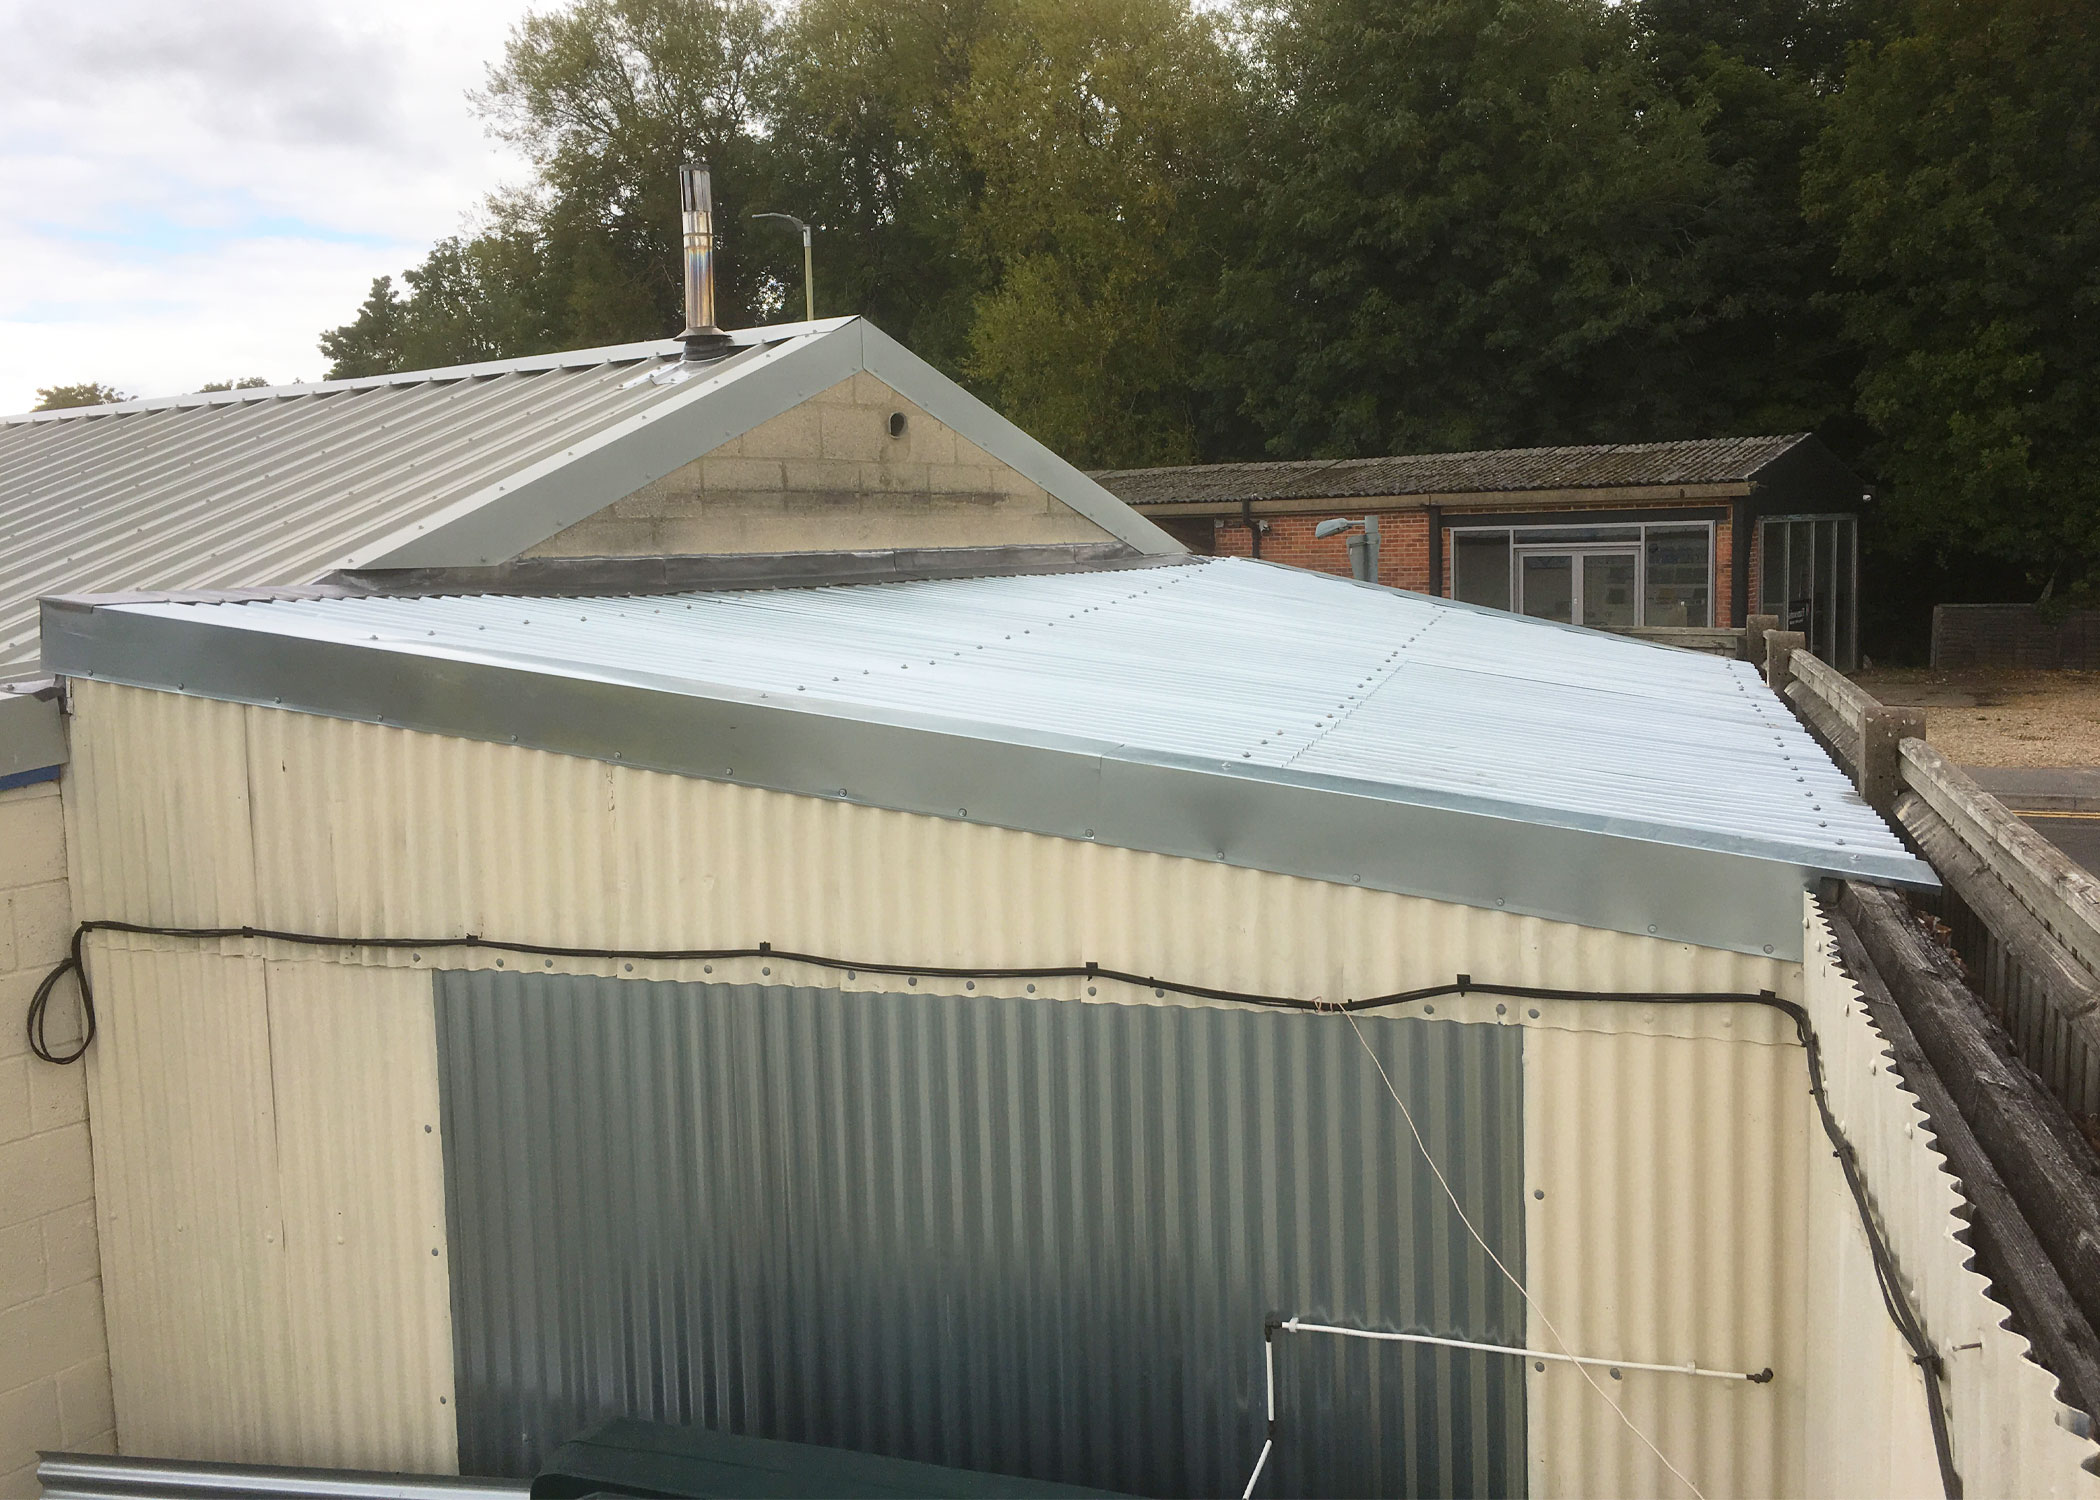 Pitched roof laid by Lavisher Building and Roofing